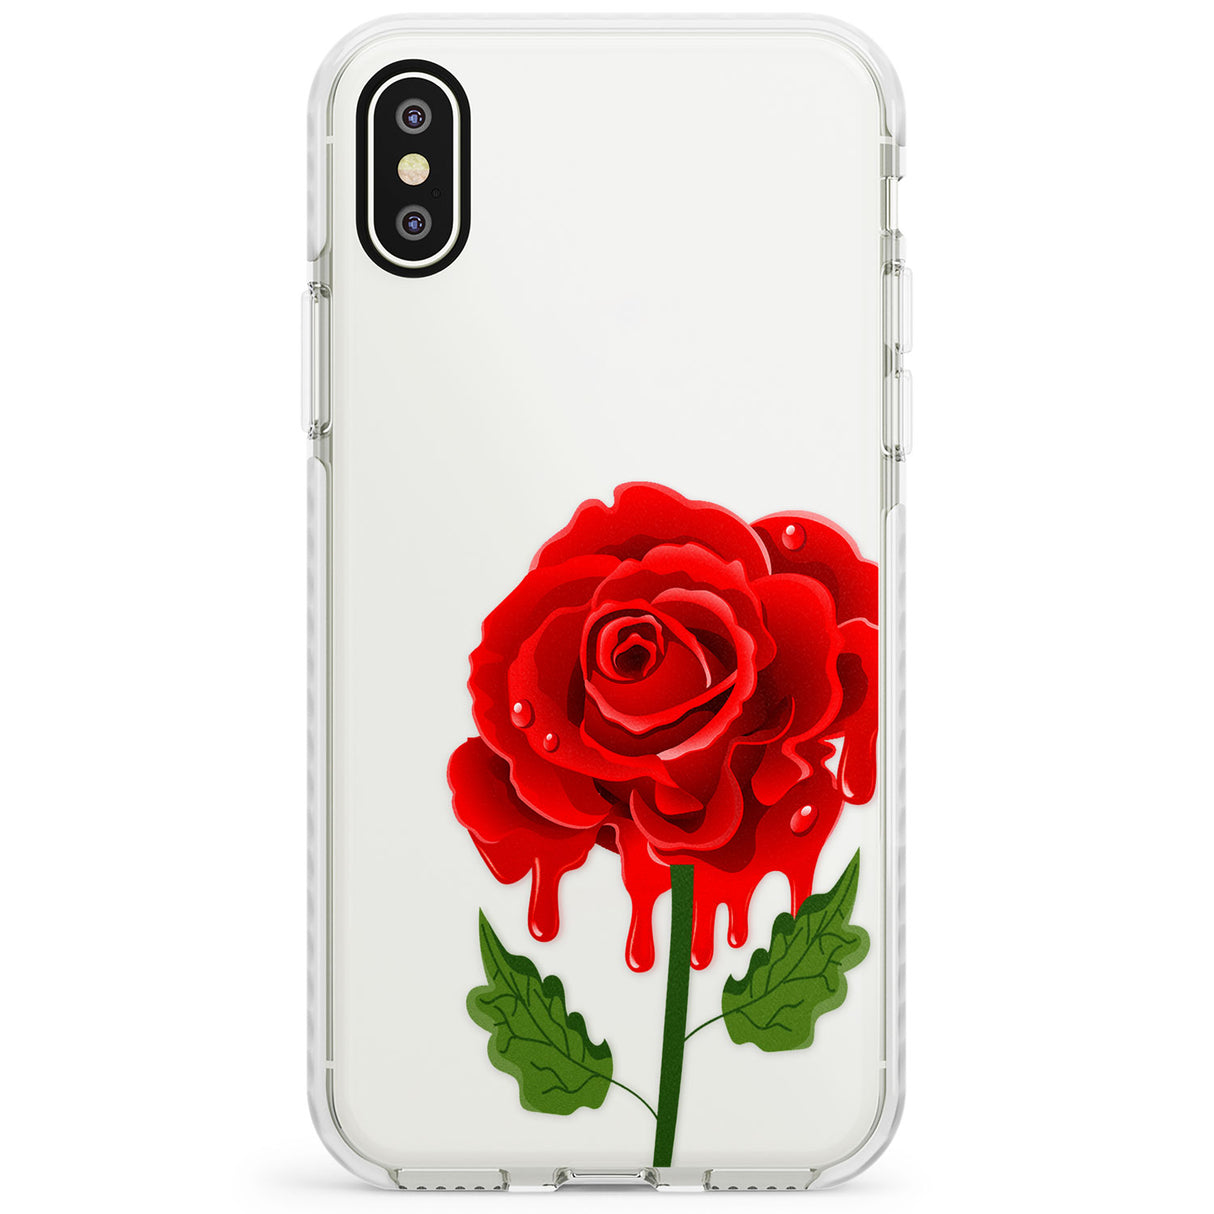 Melting Rose Impact Phone Case for iPhone X XS Max XR